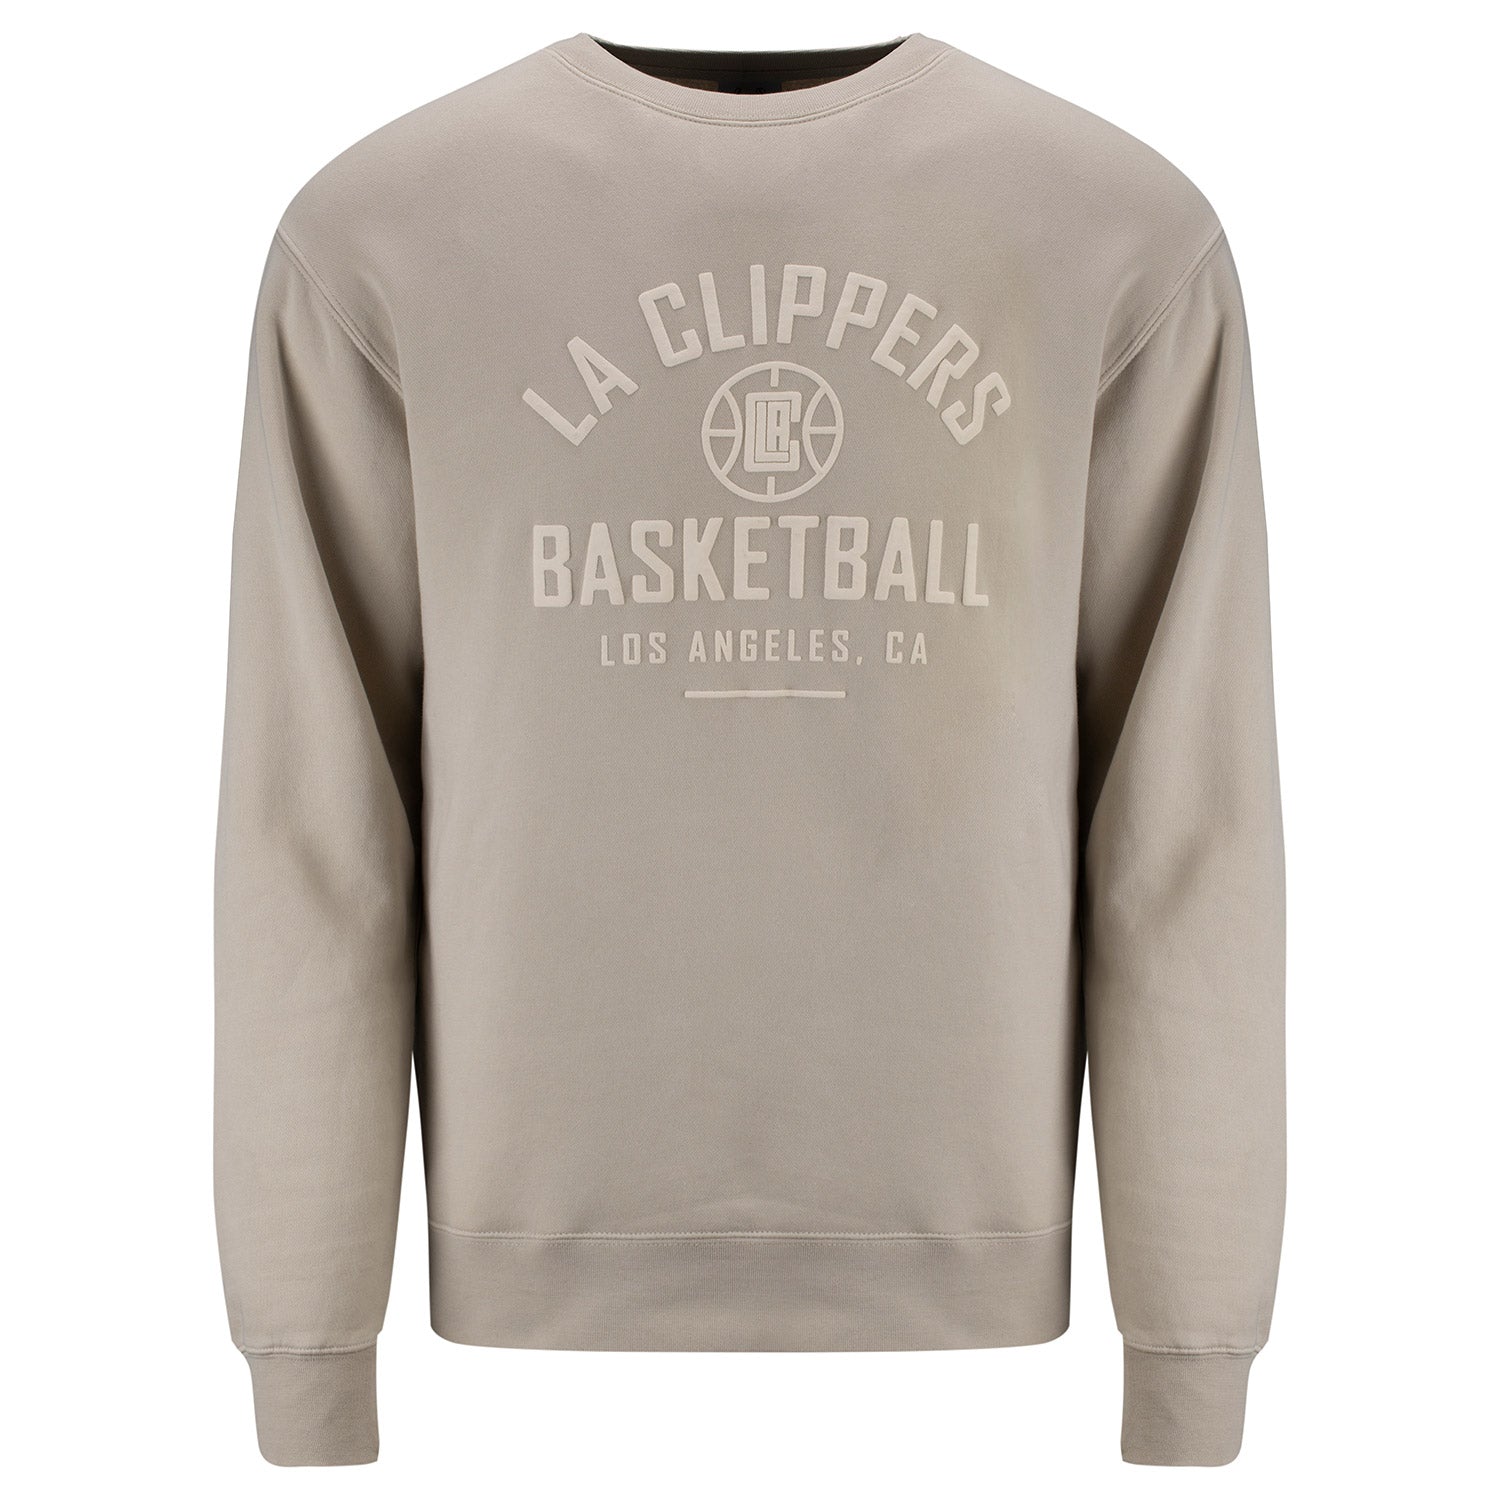 vintage clippers shirt